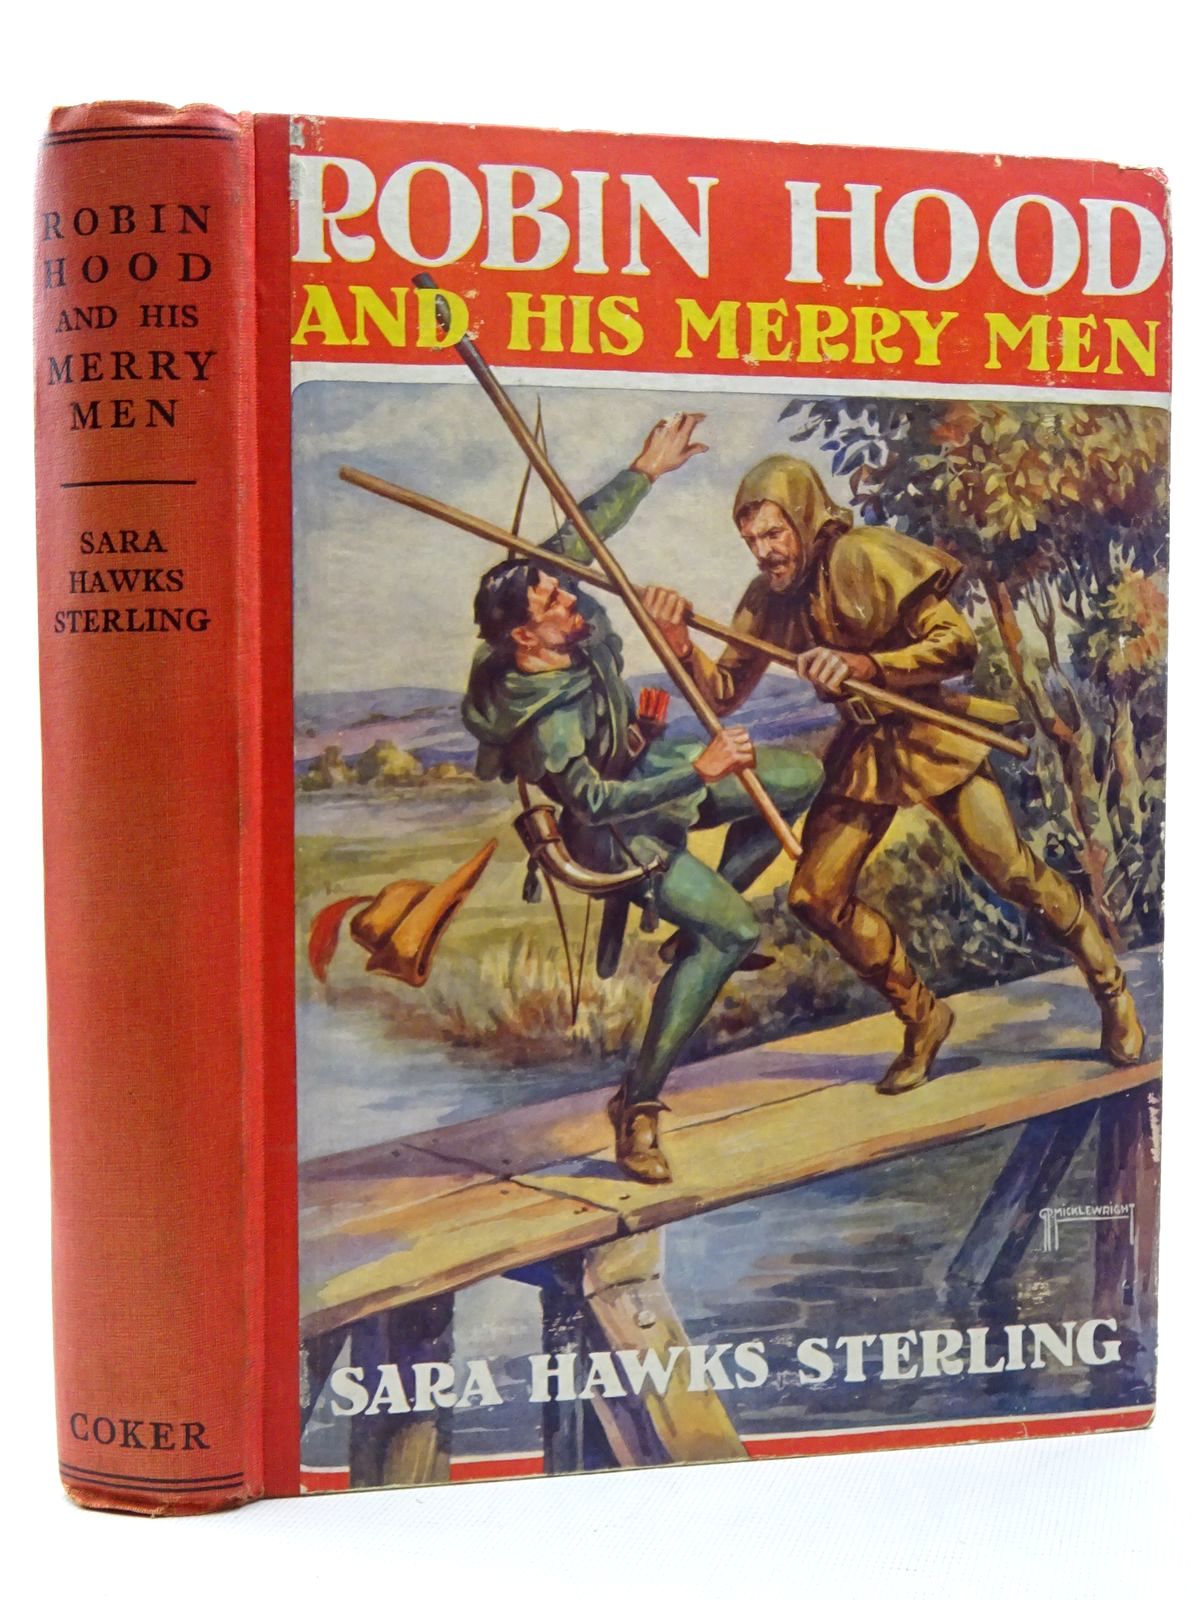 Photo of ROBIN HOOD AND HIS MERRY MEN written by Sterling, Sara Hawks illustrated by Wheelwright, Rowland published by J. Coker & Co. Ltd. (STOCK CODE: 2125029)  for sale by Stella & Rose's Books